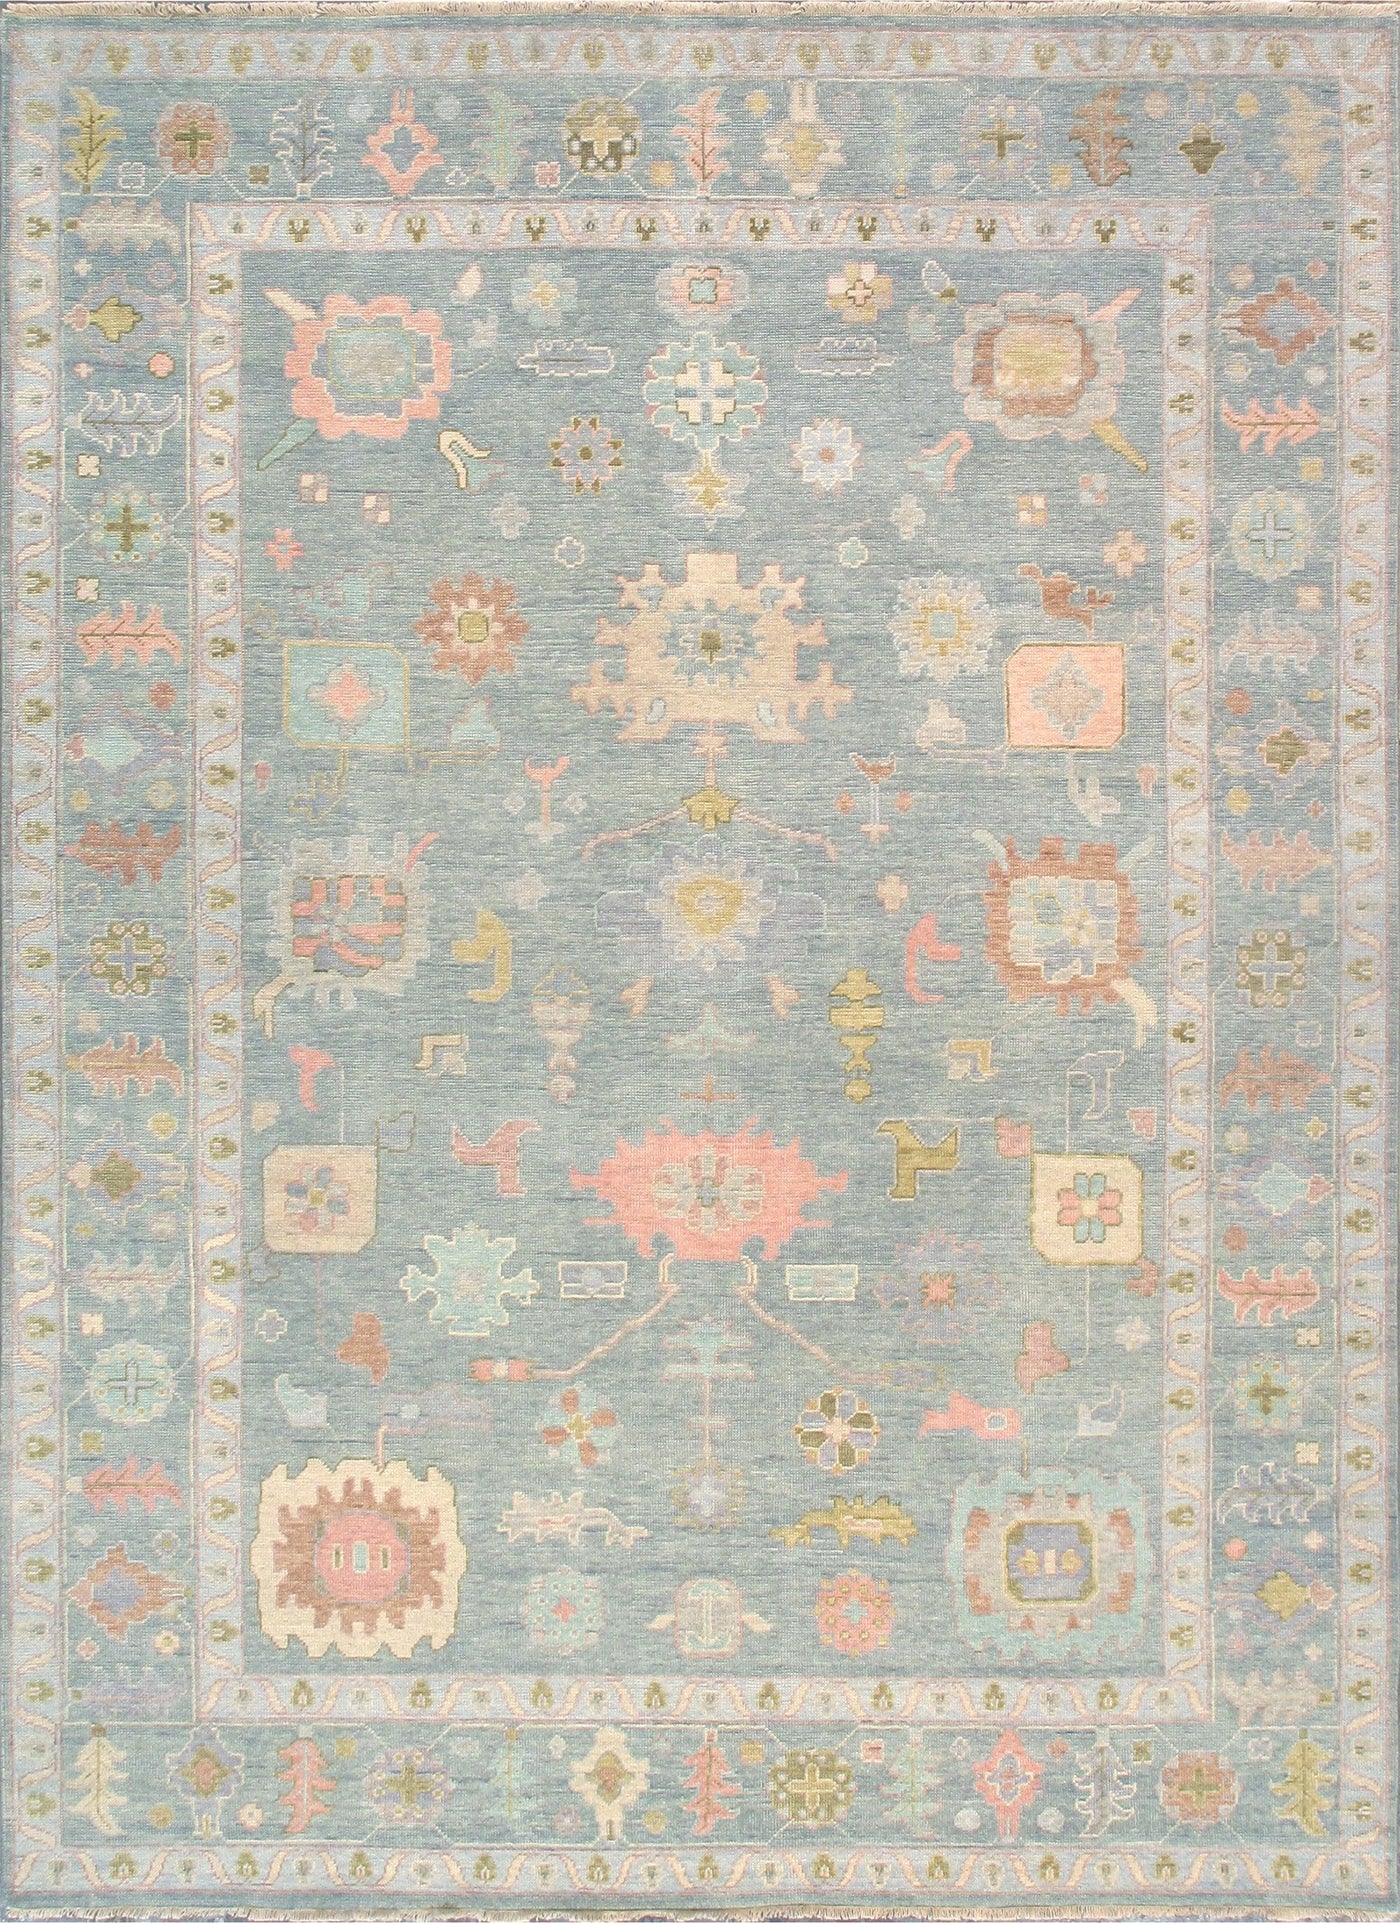 Canvello Oushak Hand-Knotted Light Blue Wool Area Rug- 8'11" X 12'1"